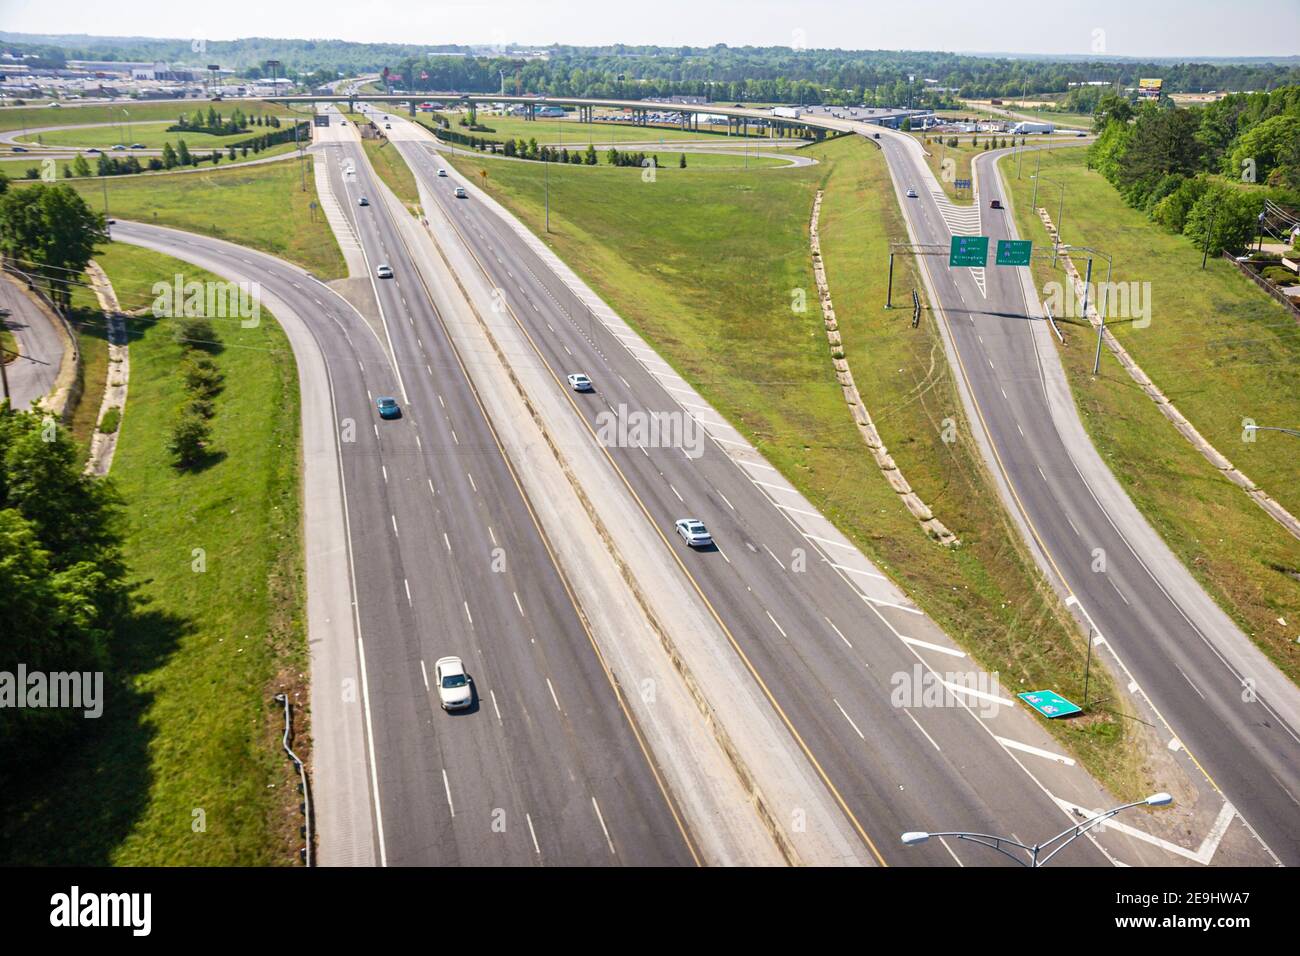 Tuscaloosa Alabama,Interstate 359 divided highway traffic,aerial overhead view, Stock Photo